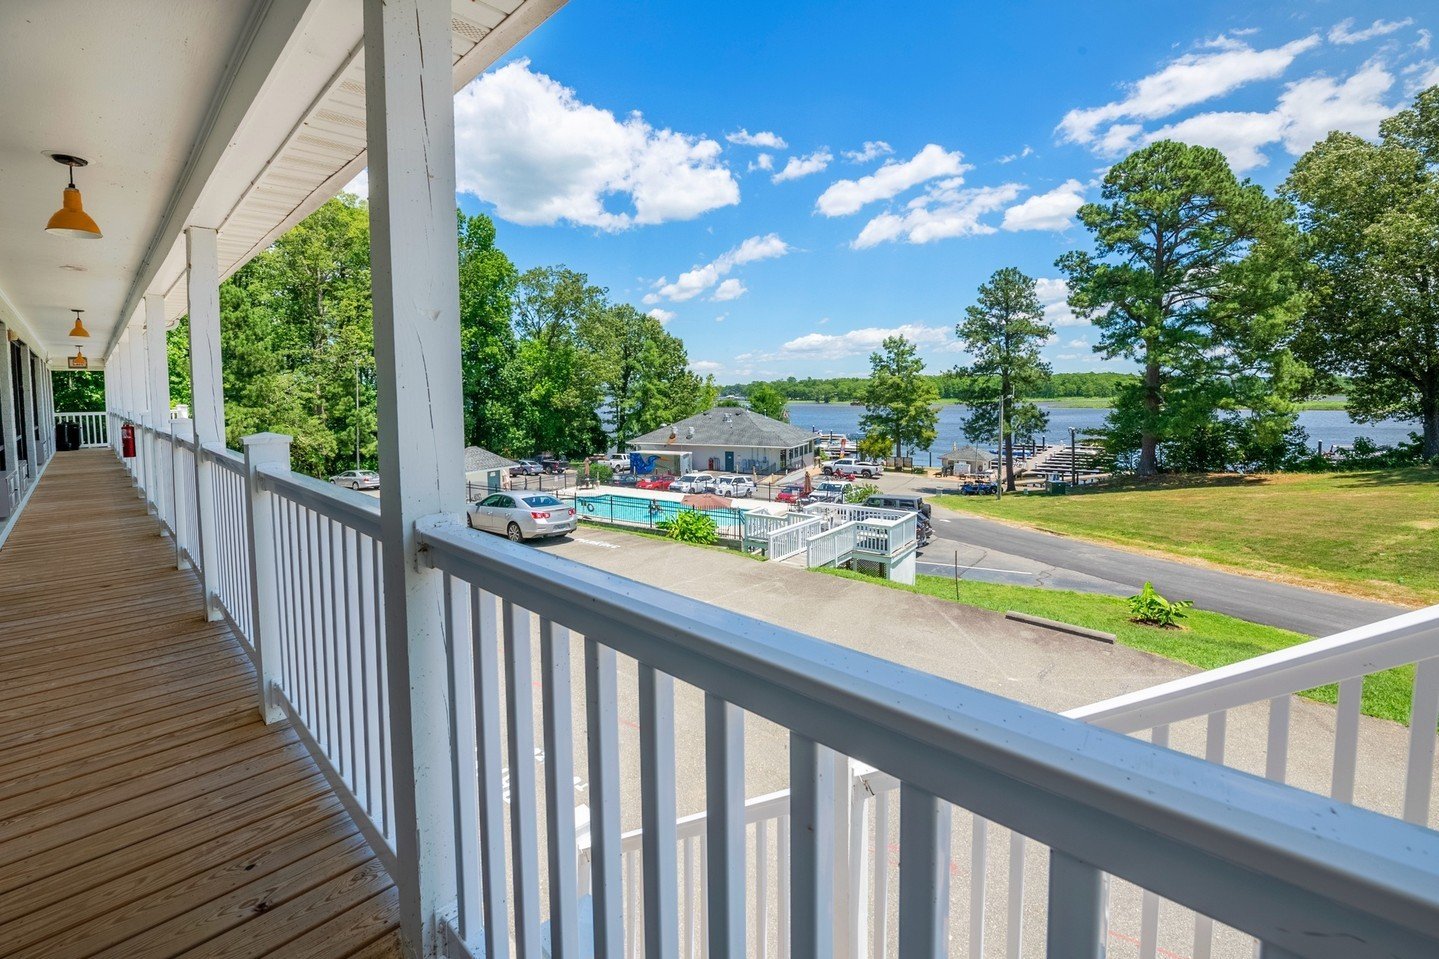 Discover the variety of ways to experience River's Rest Resort &amp; Marina! ☀️ 

Whether you prefer land or sea, we've got you covered with seasonal RV sites and boat slip leasing to our 21-room Inn located steps from the marina! Your ultimate summe